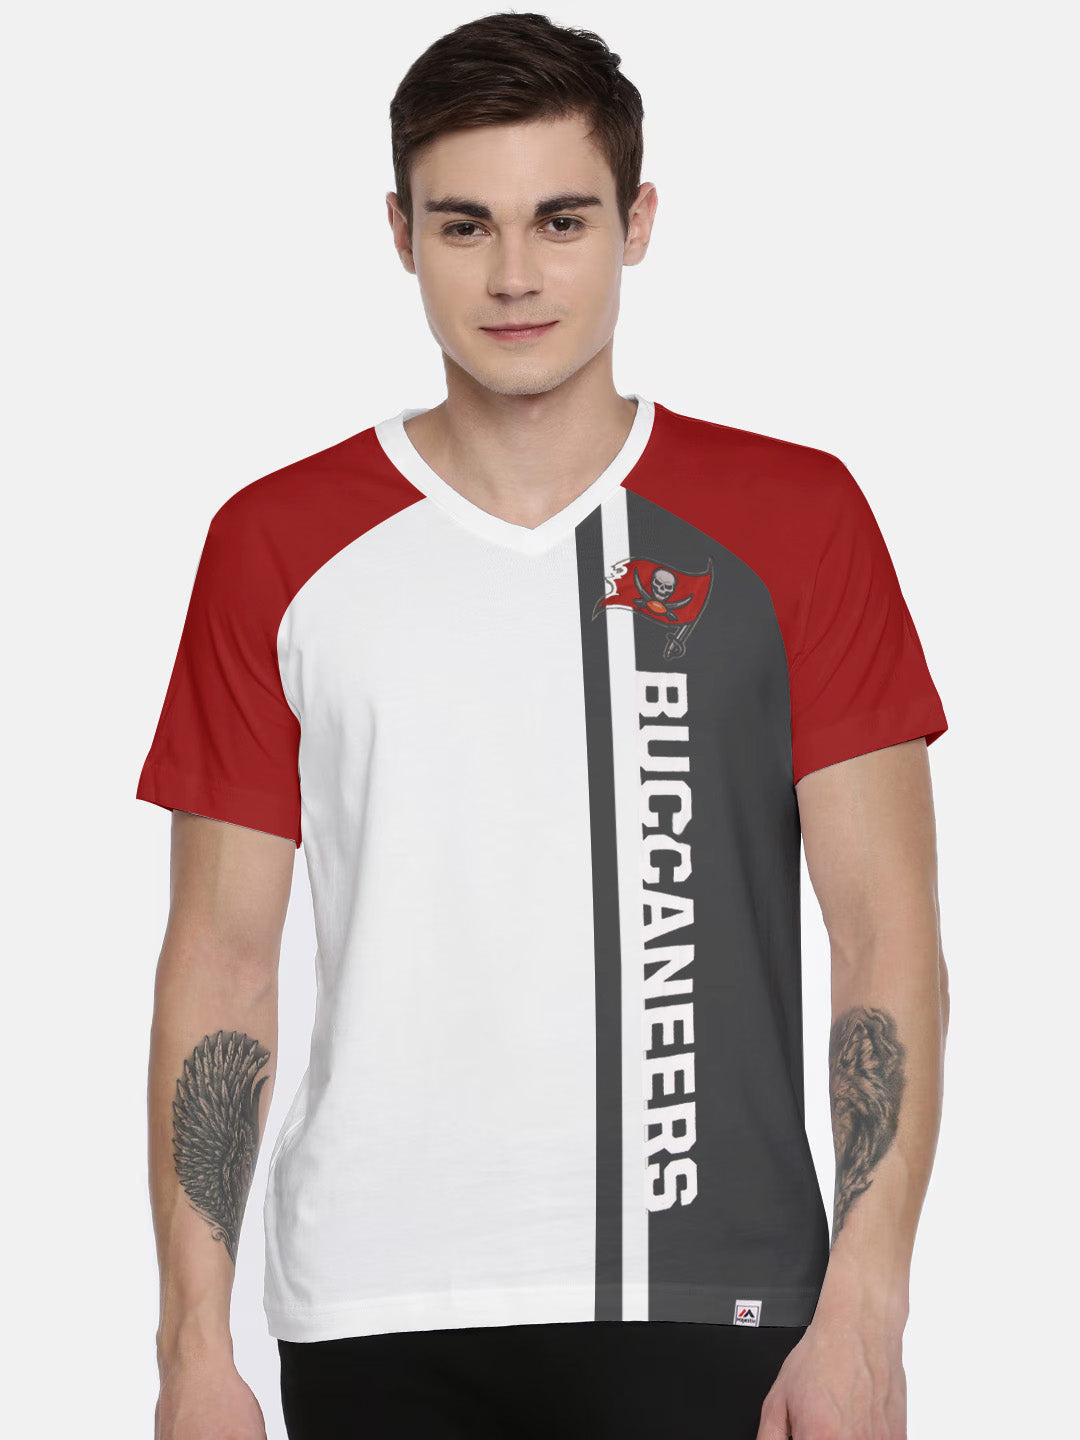 Magestic Single Jersey V Neck Tee Shirt For Men-White with Red & Charcoal-BE1136